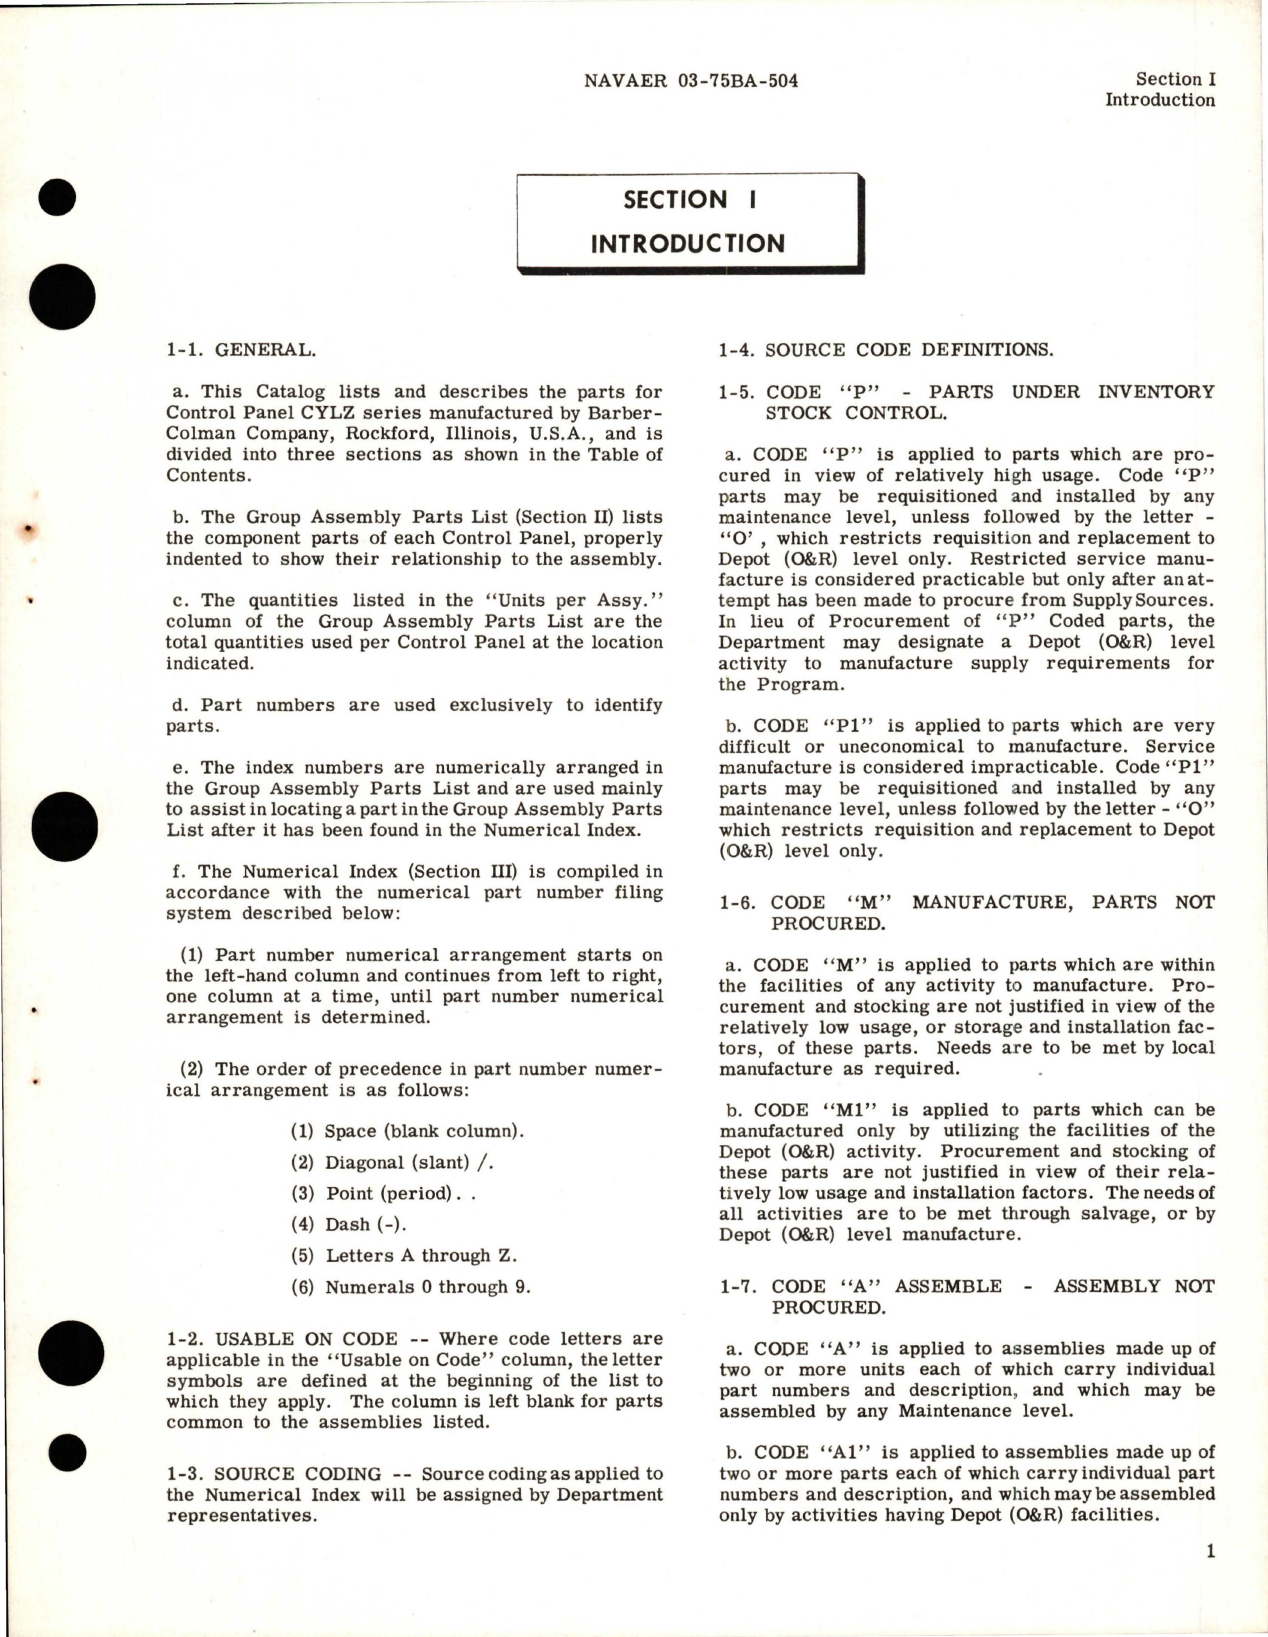 Sample page 5 from AirCorps Library document: Illustrated Parts Breakdown for Aircraft Temperature Control System Control Panel - Parts CYLZ 3534-1 and CYLZ 3734-1